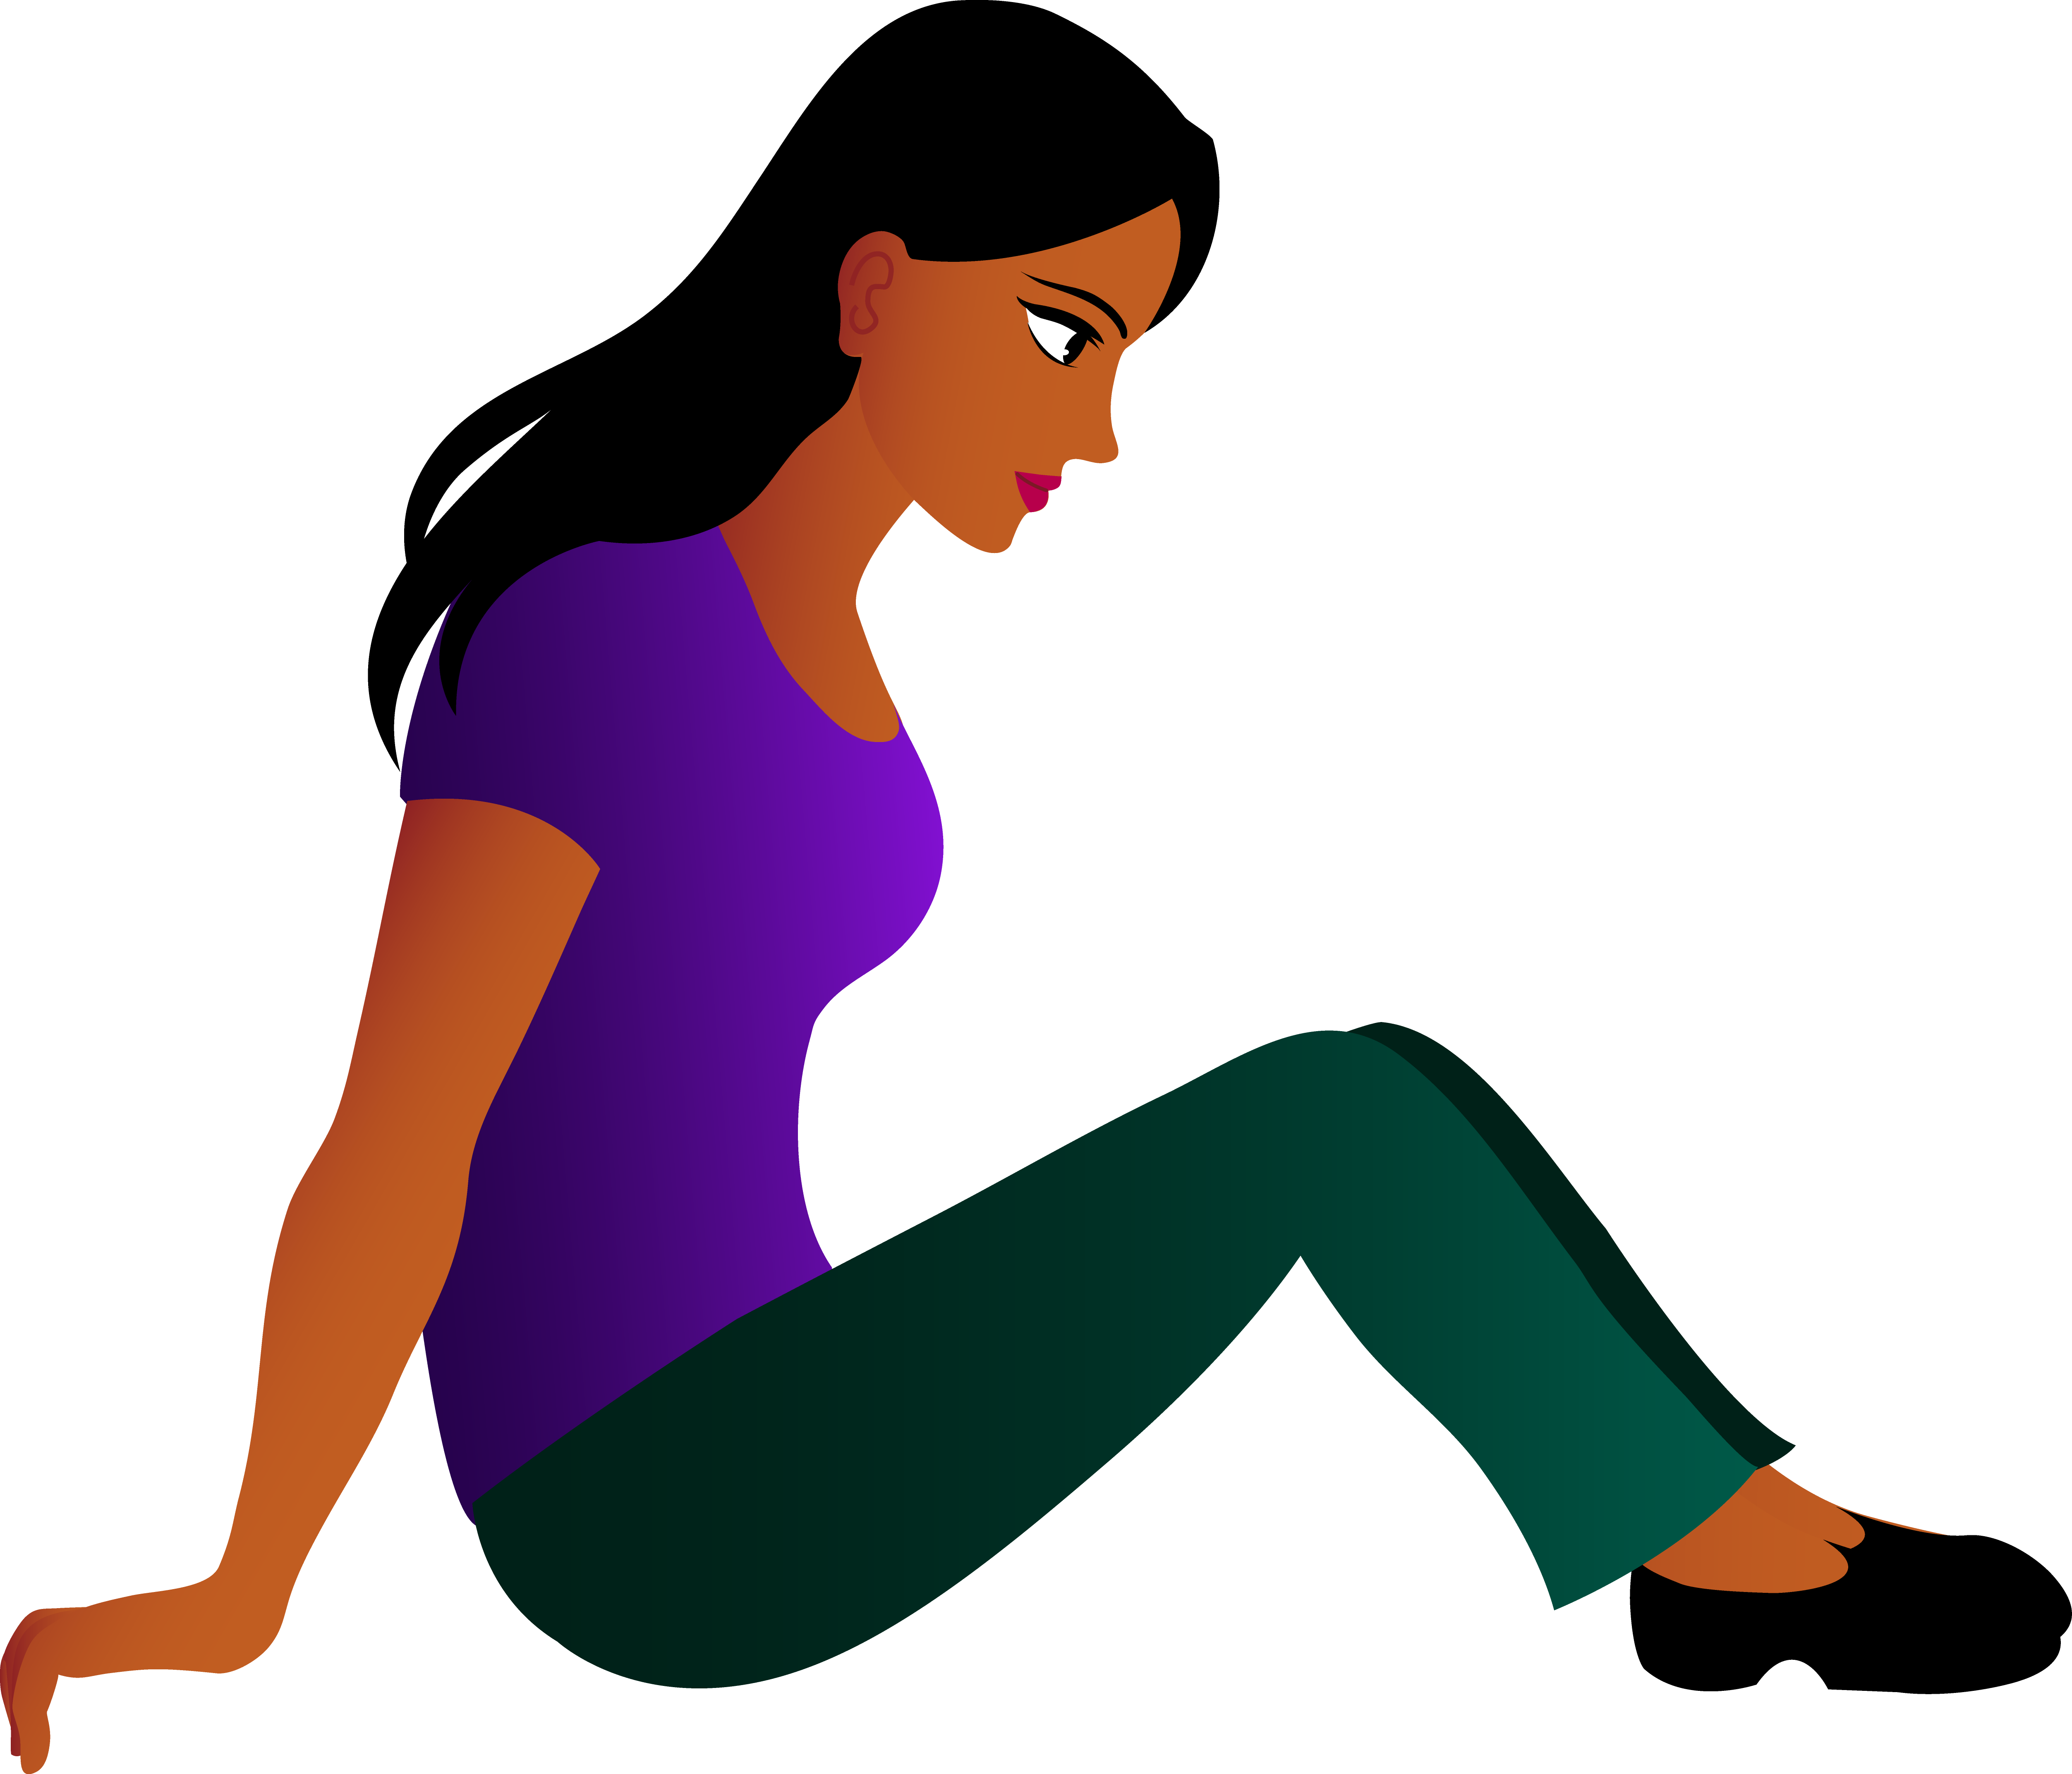 Person Sitting Down Clipart